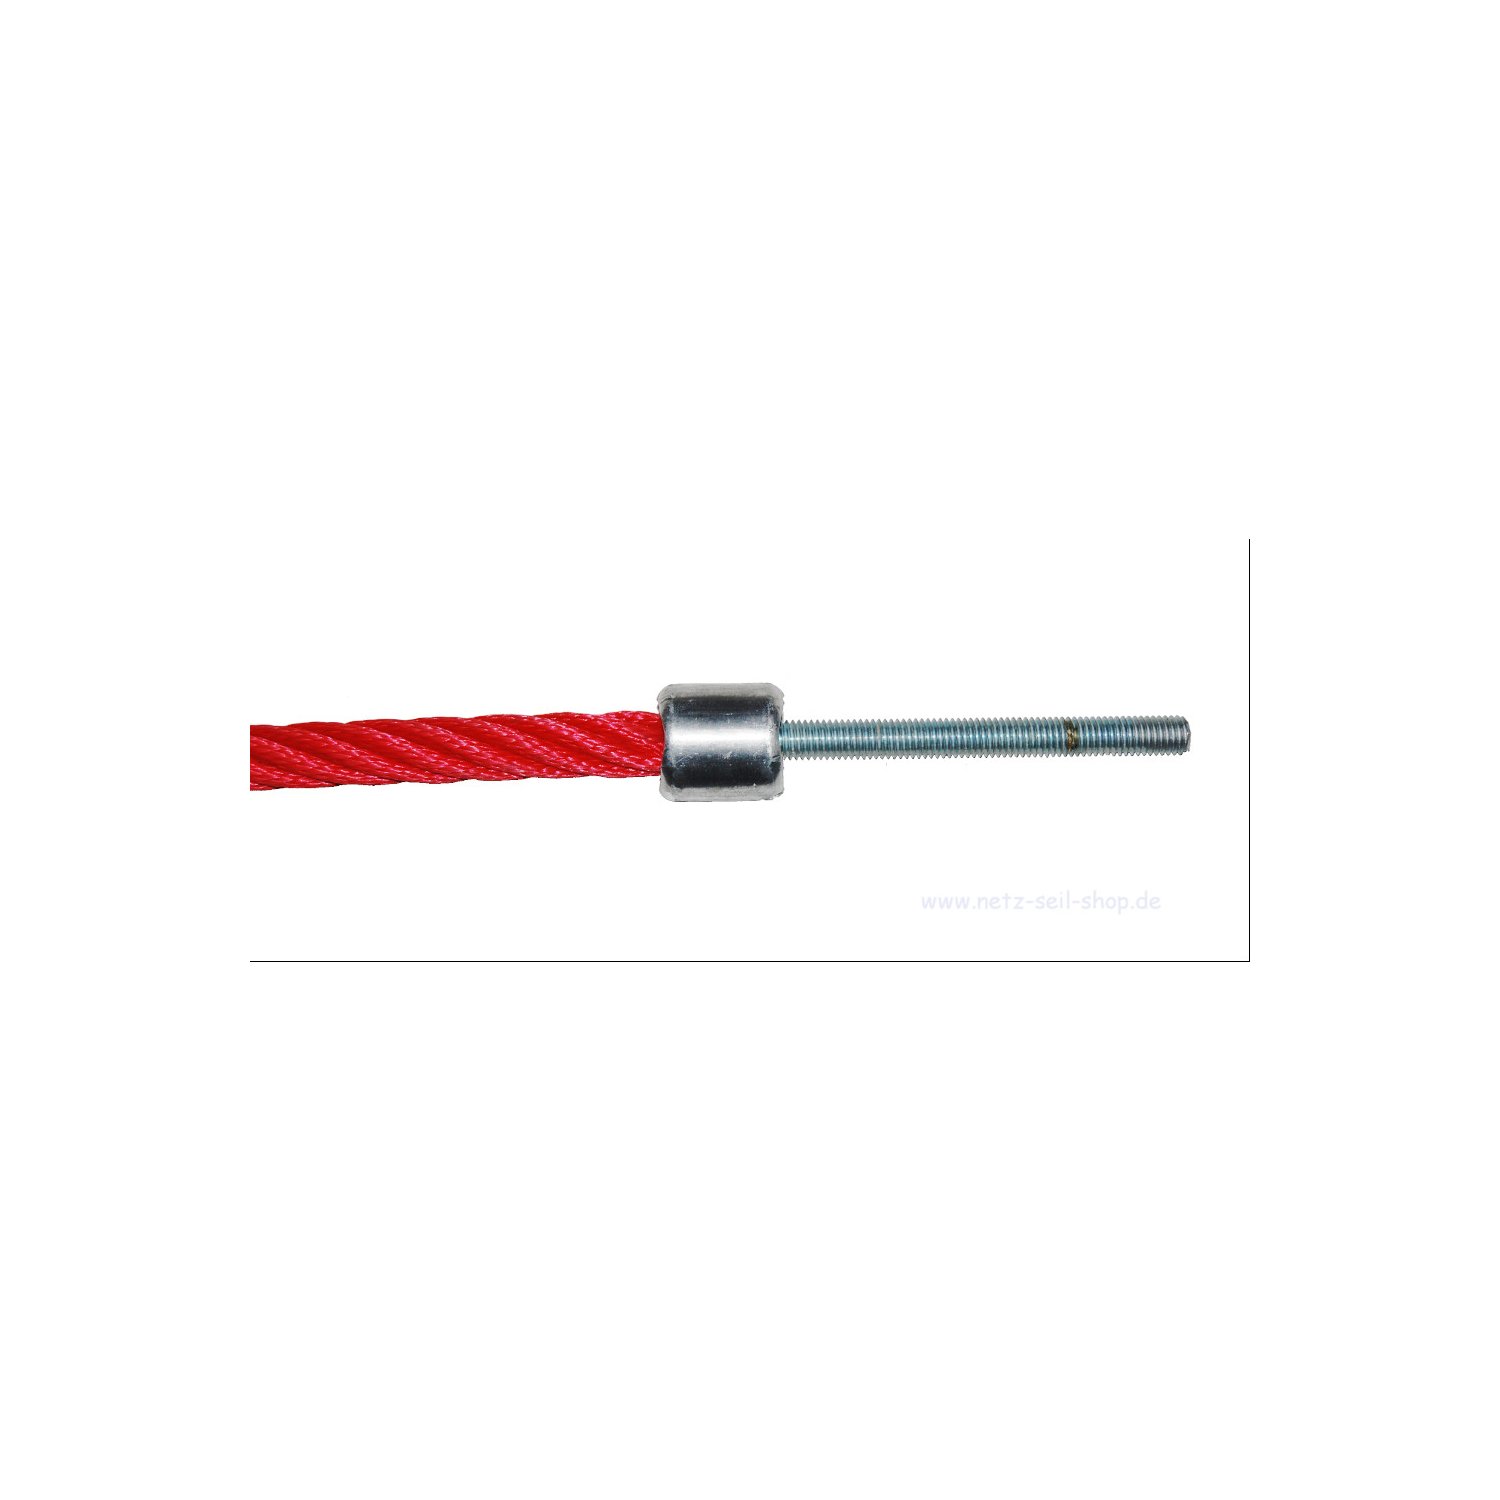 Stainless steel threaded bolt M12 x 140 mm, V2A, directly pressed [13,09 EUR]